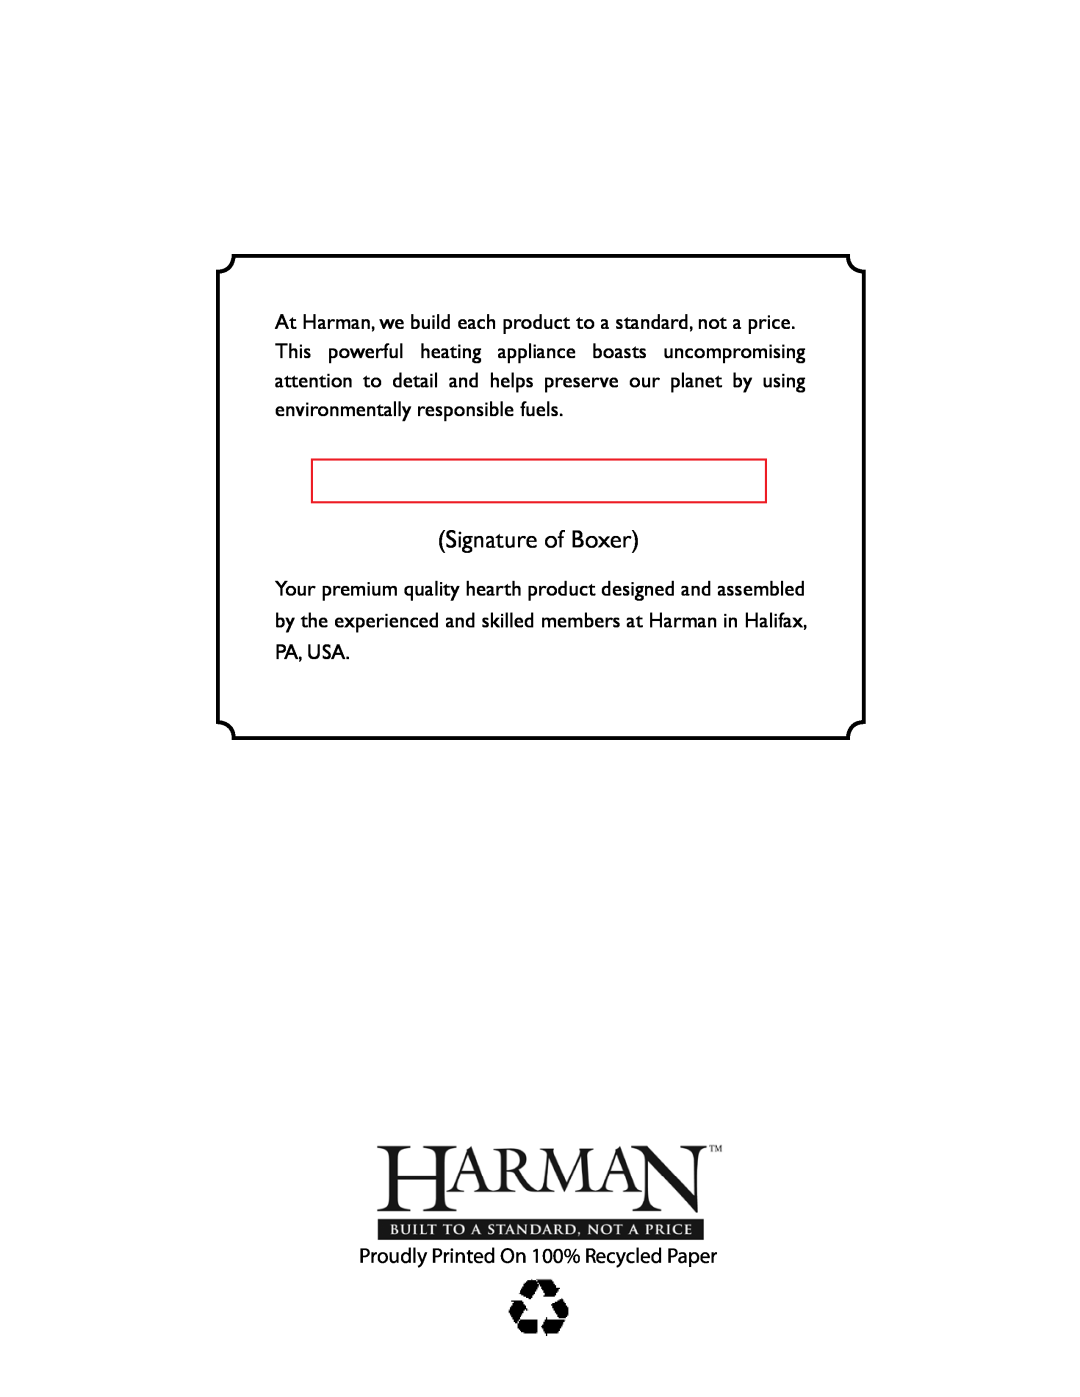 Harman Stove Company TL2.0 manual Signature of Boxer, Proudly Printed On 100% Recycled Paper 